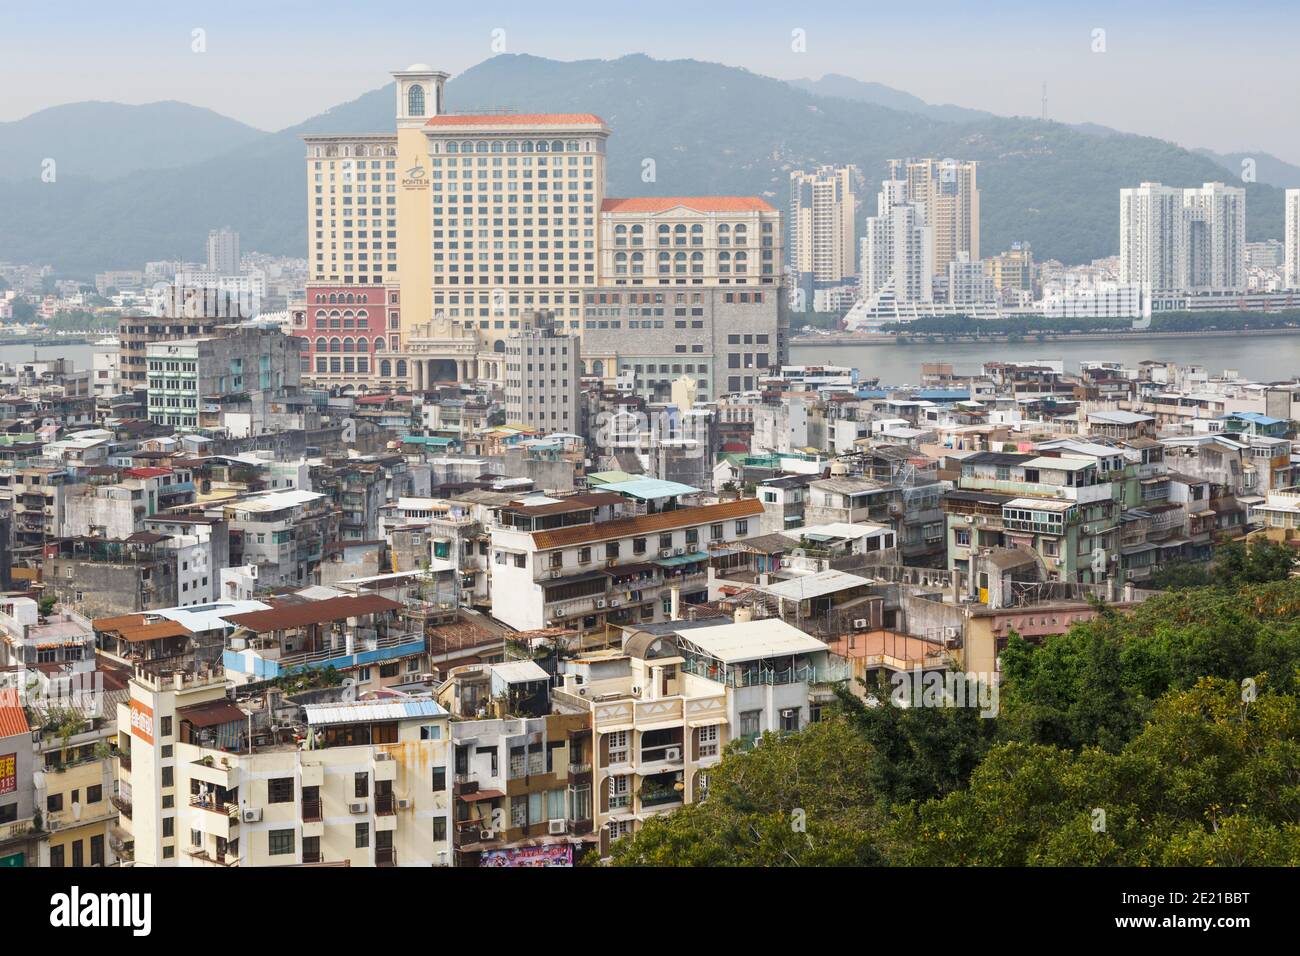 Macau, China. View over western area of city with 5-star Hotel Ponte 16.  The historic centre of Macao is a UNESCO World Heritage Site. Stock Photo